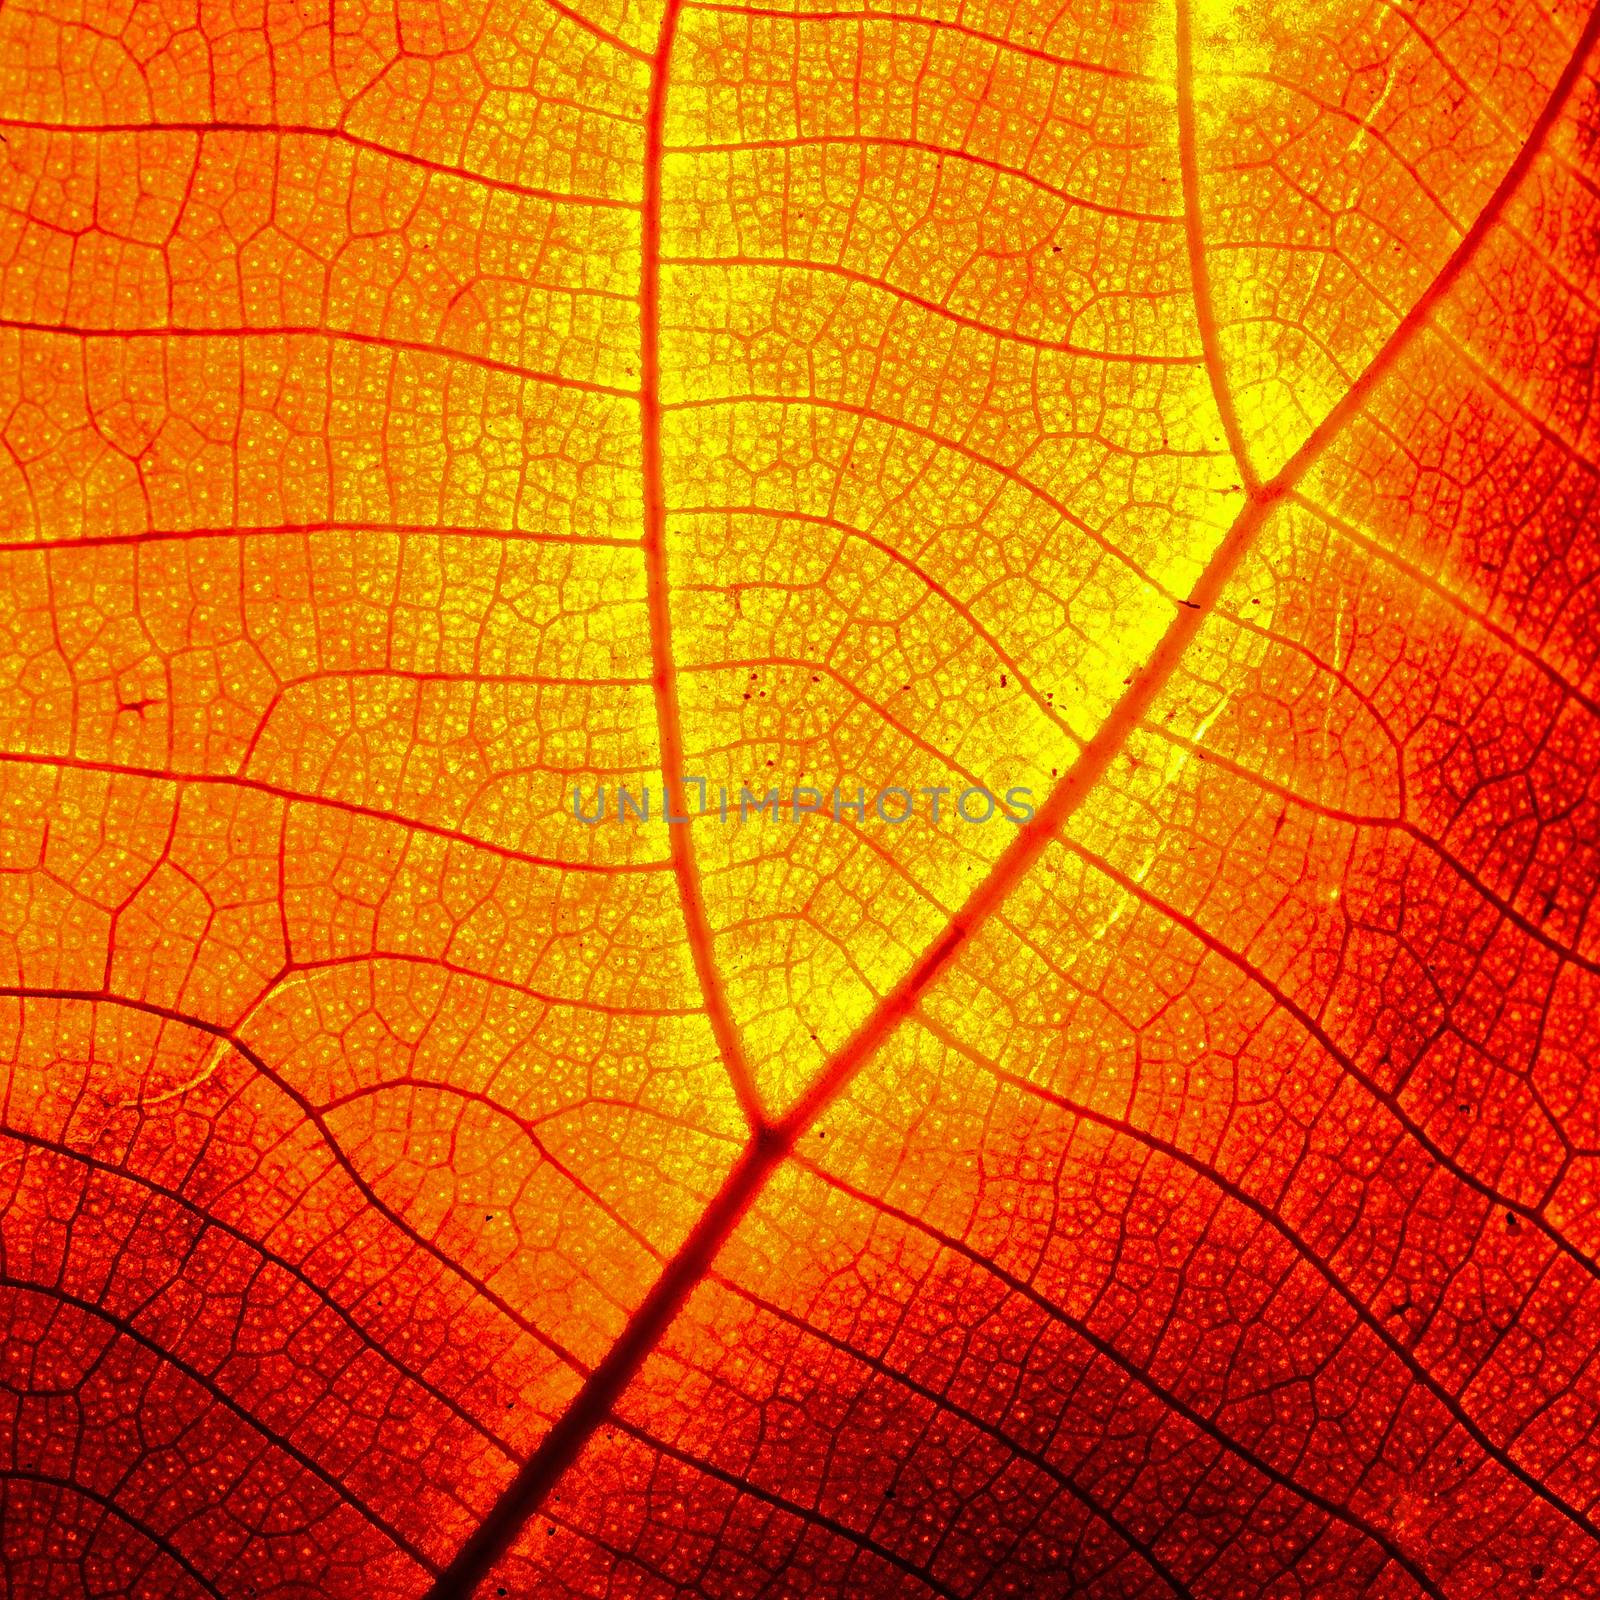 Red leaf abstract background texture